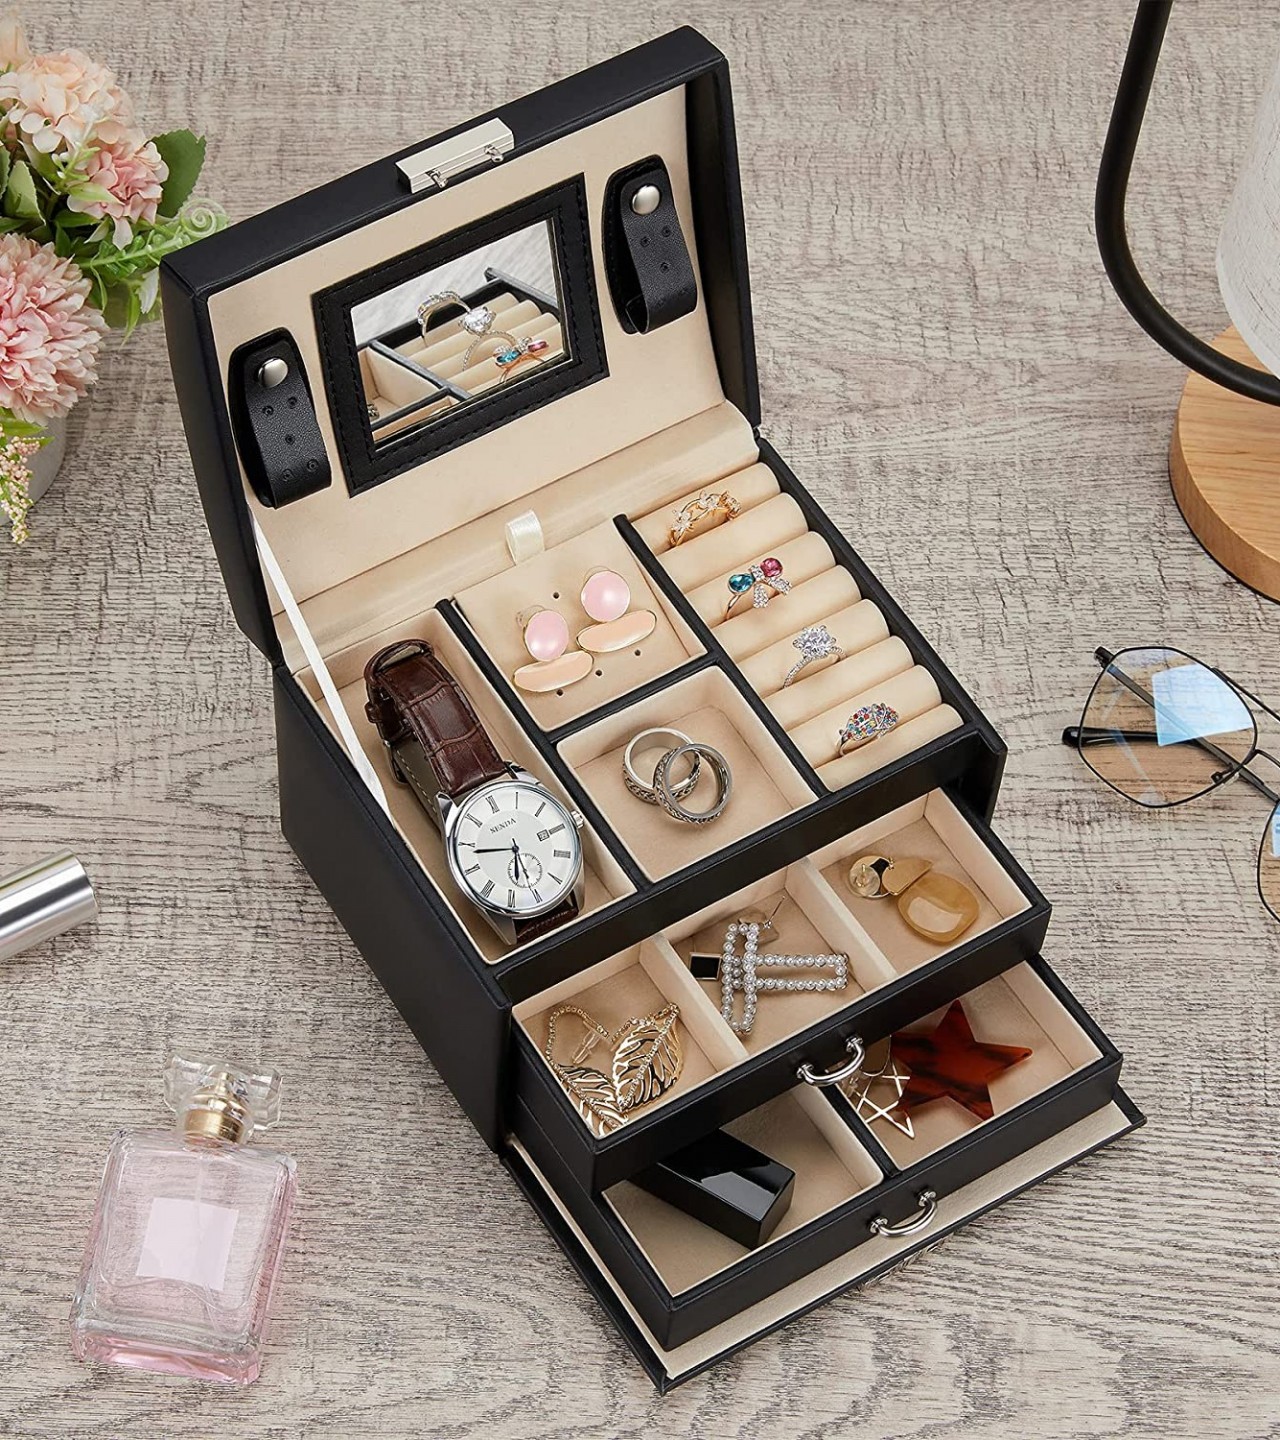 3 Layer Pu Leather Jewelry Storage Organizer With Mirror And Lock Drawer Used To Store jewellery Box